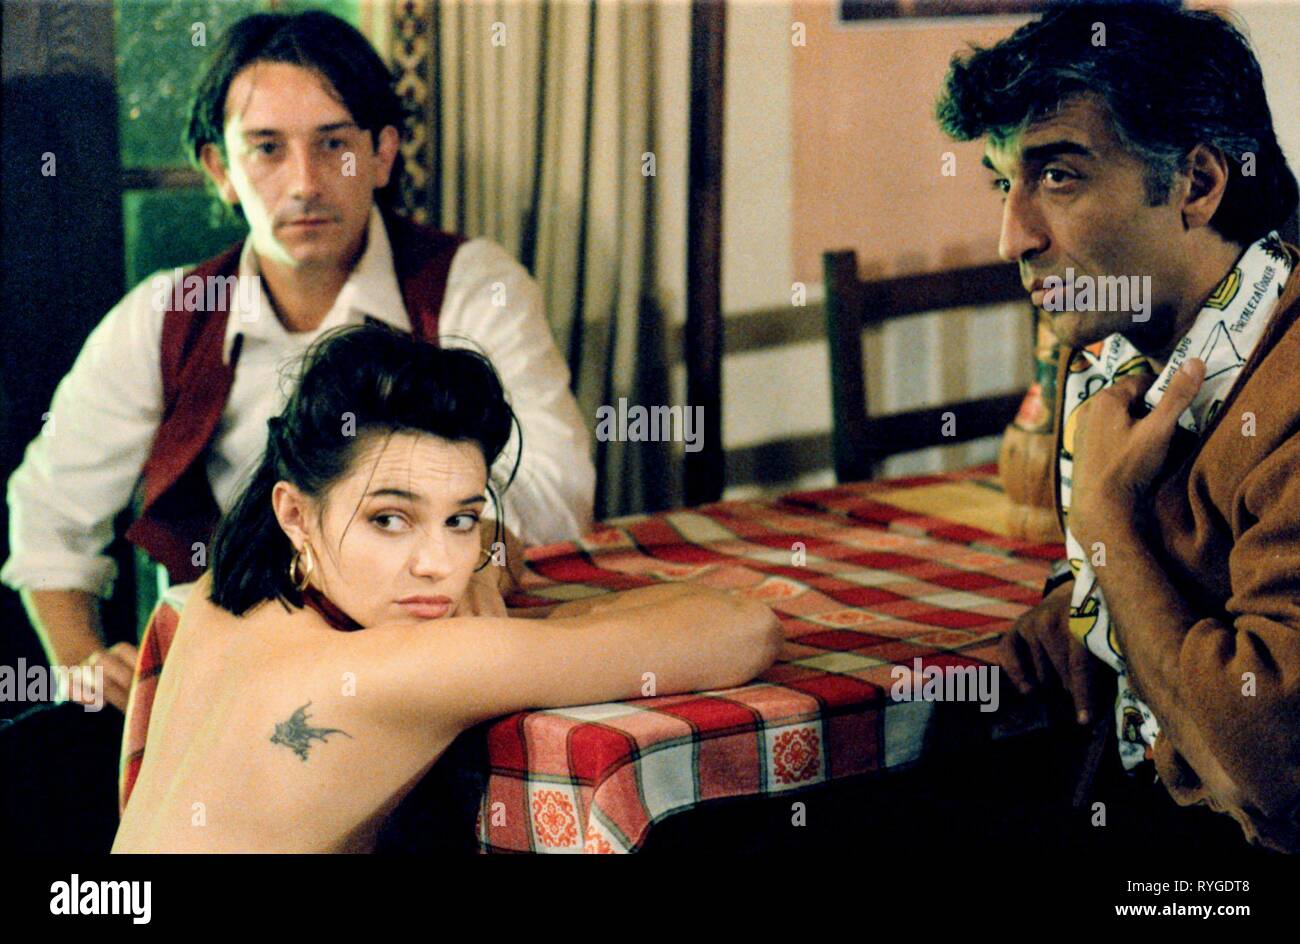 JEAN-HUGUES ANGLADE, BEATRICE DALLE, BETTY BLUE, 1986 Stock Photo - Alamy